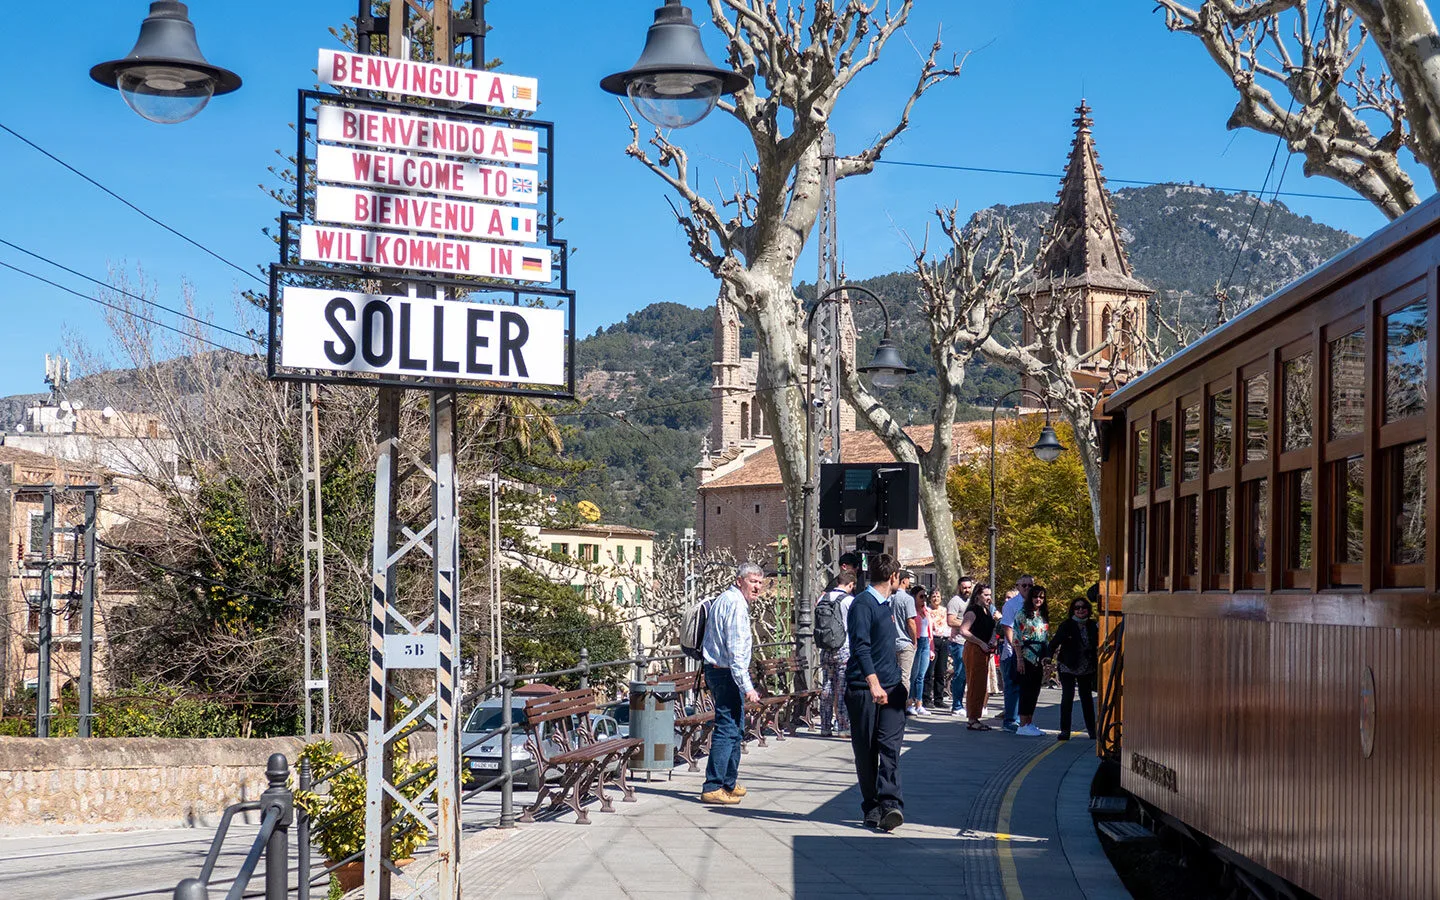 Sóller station and the train from Palma to Soller